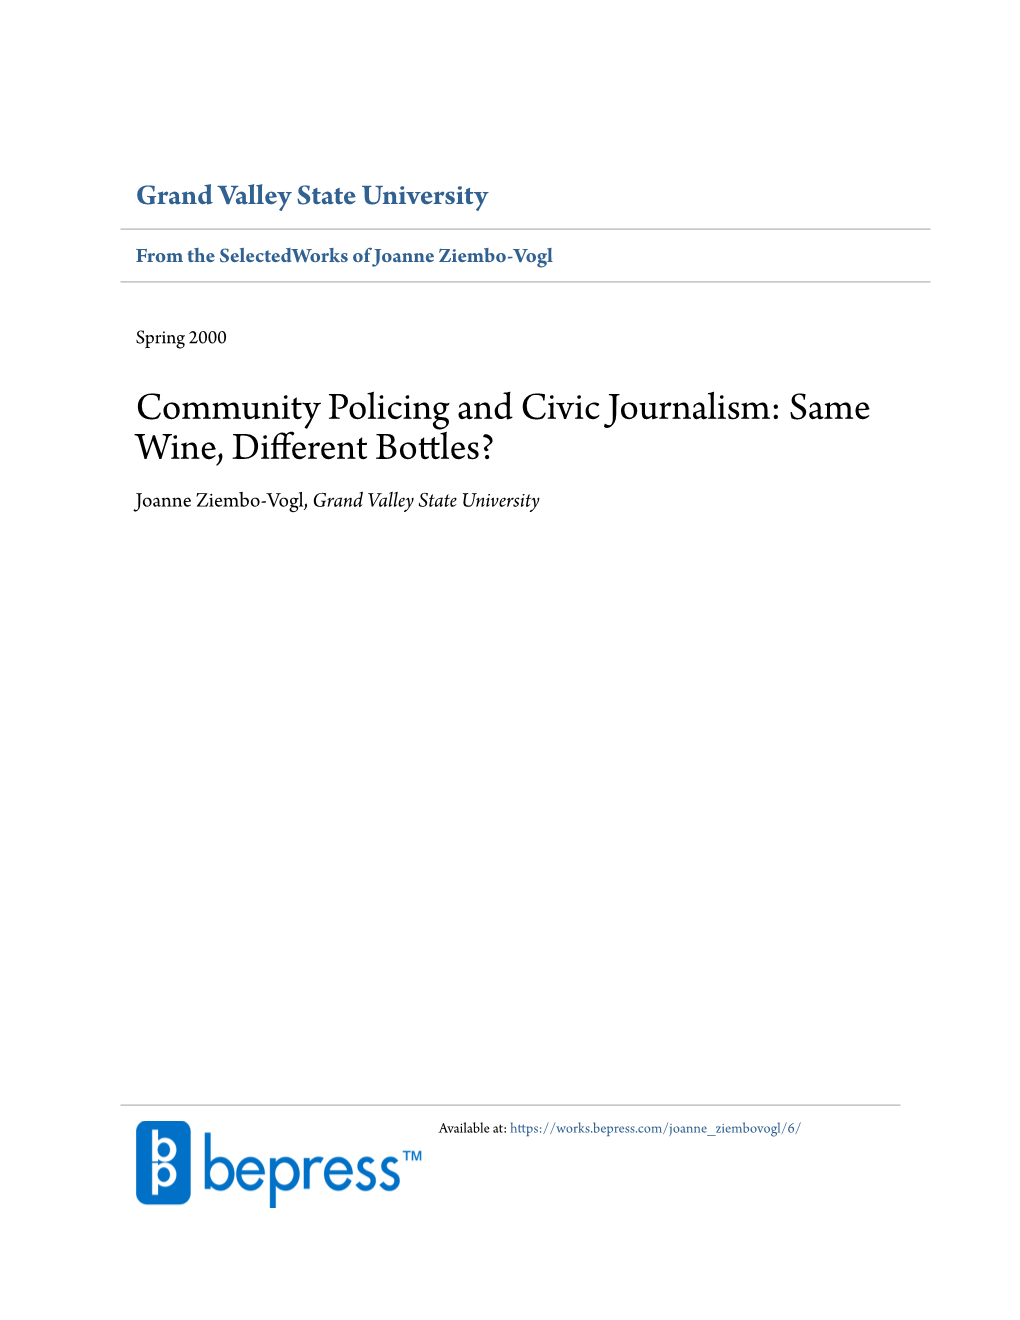 Community Policing and Civic Journalism: Same Wine, Different Bottles? Joanne Ziembo-Vogl, Grand Valley State University